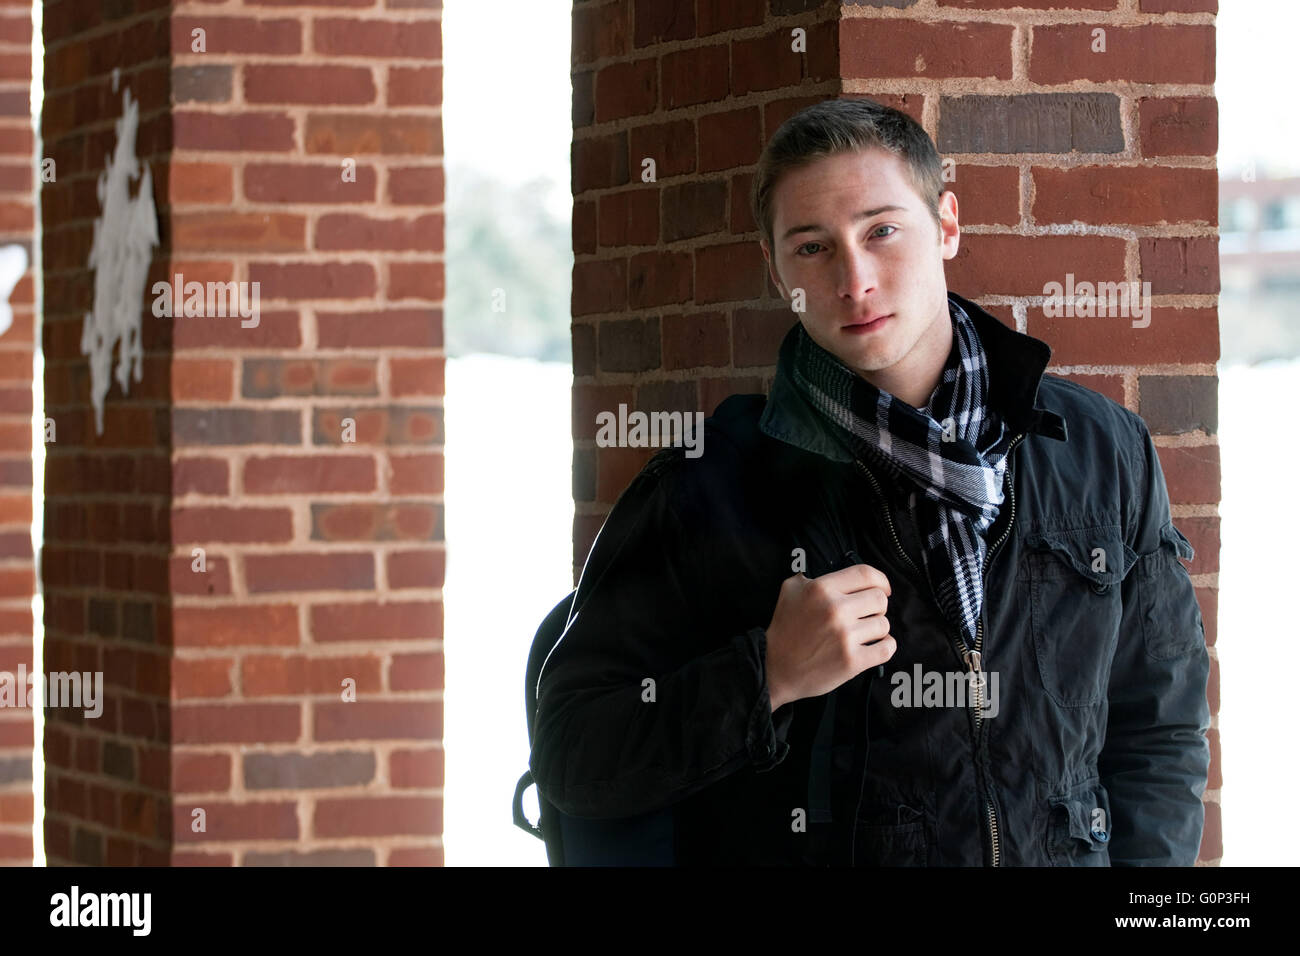 A portrait of a young man standing in an outdoor corridor with his backpack. Stock Photo